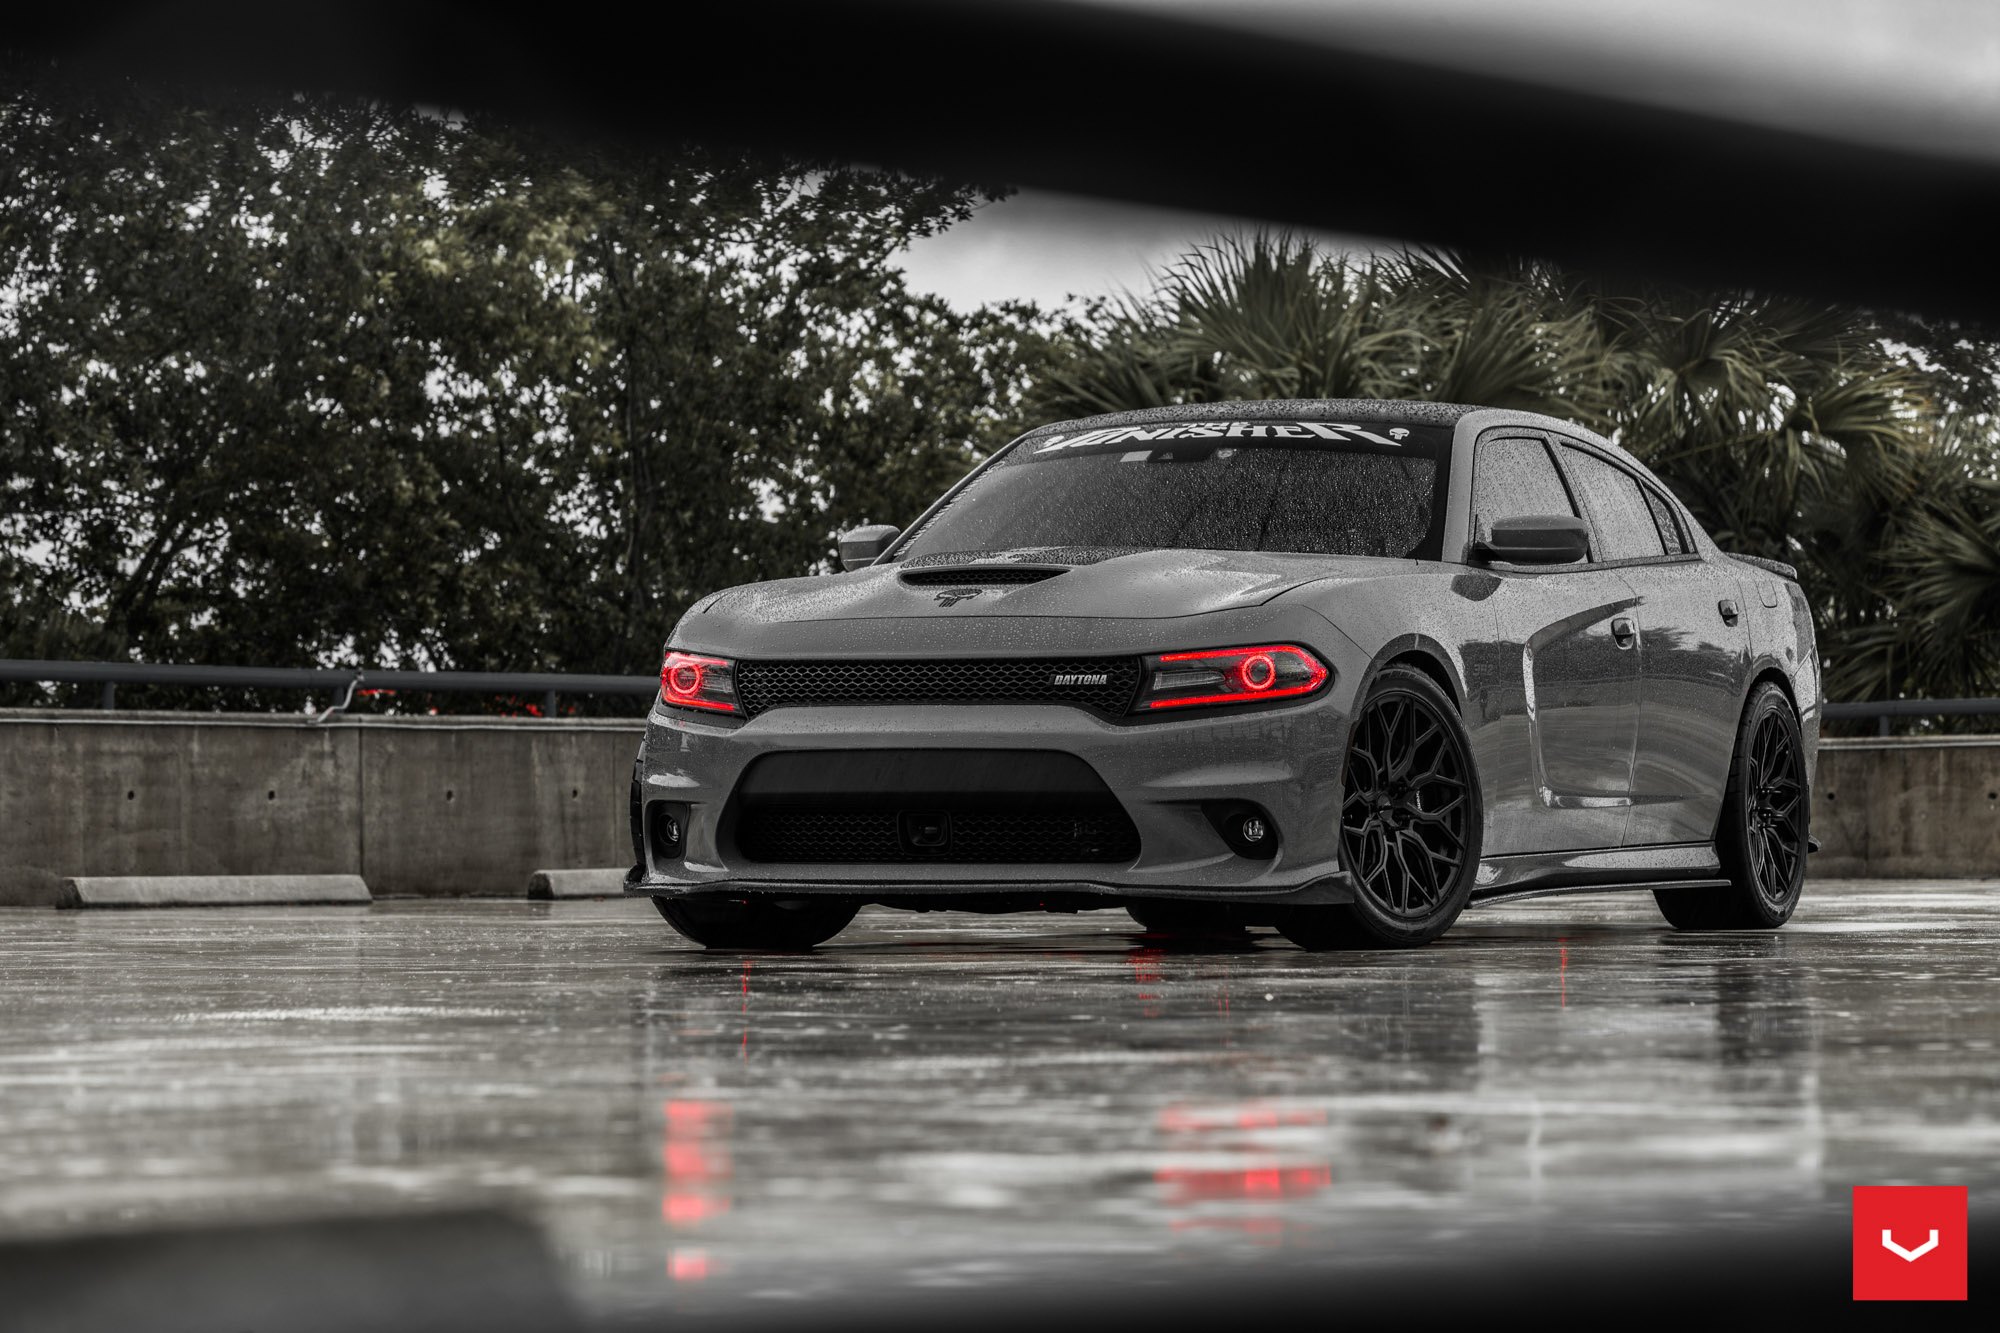 Gray Dodge Charger with Custom Color Halo Headlights - Photo by Vossen